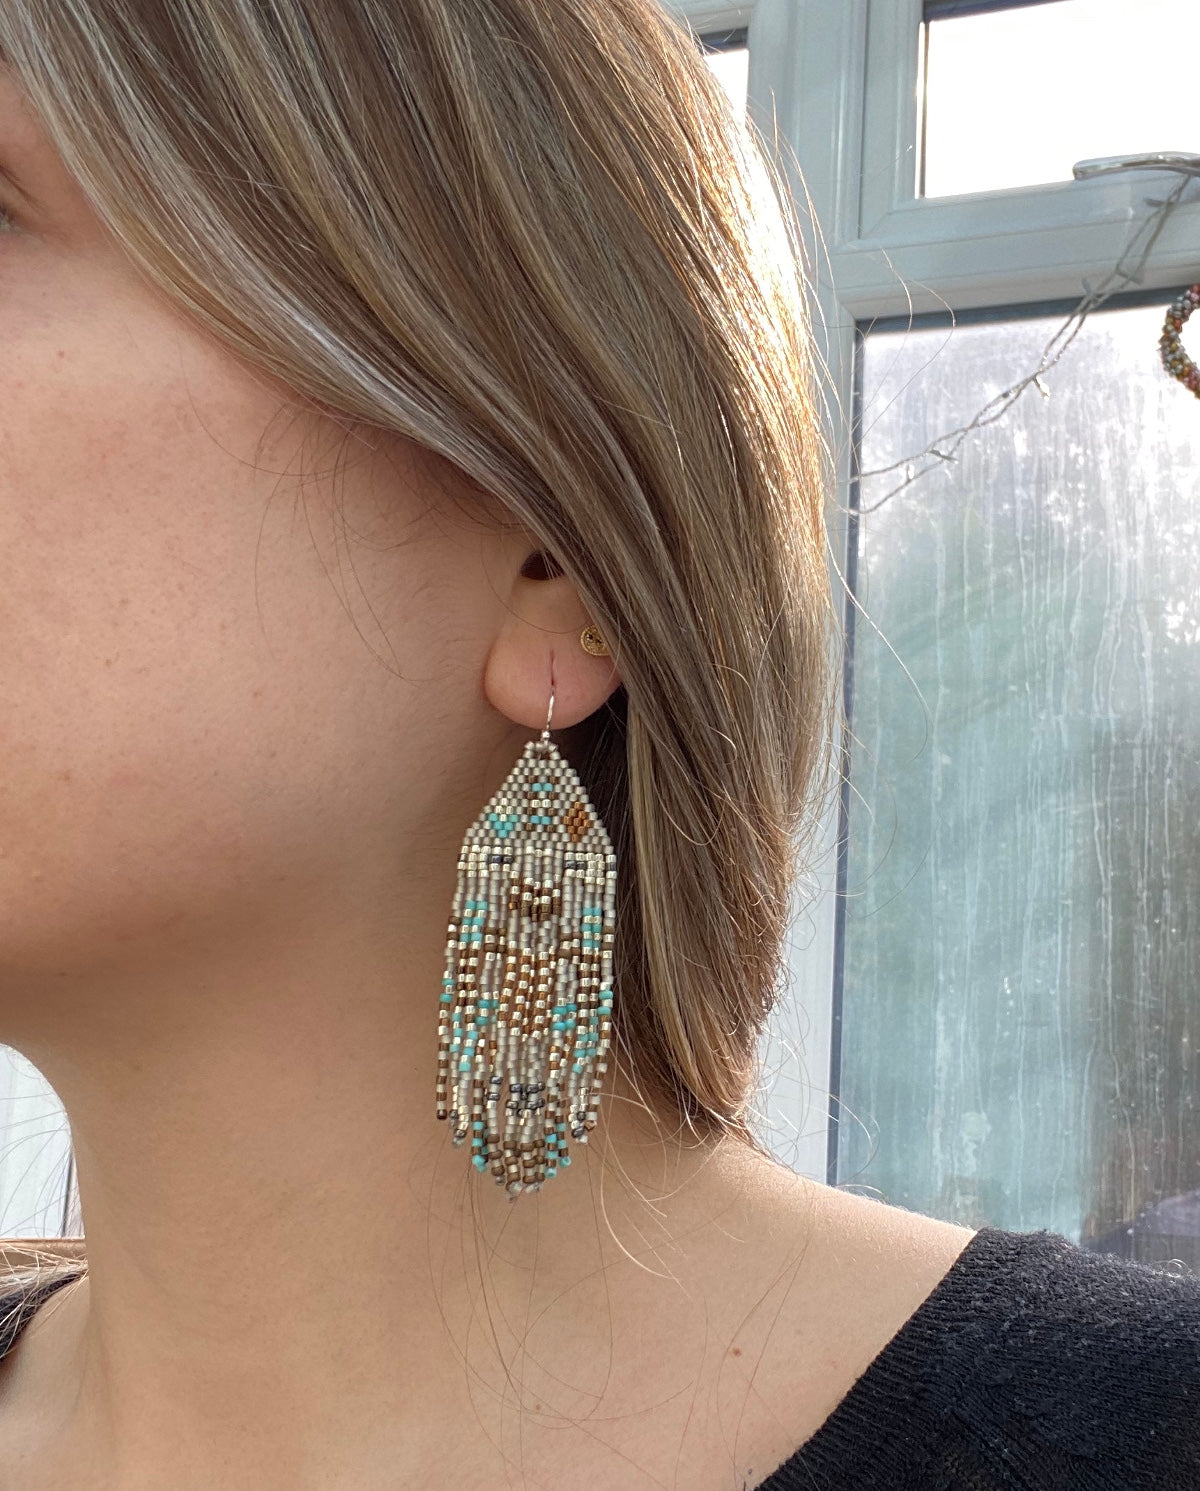 PYRAMID EARRINGS IN TURQUOISE, GREY, BROWN & SILVER